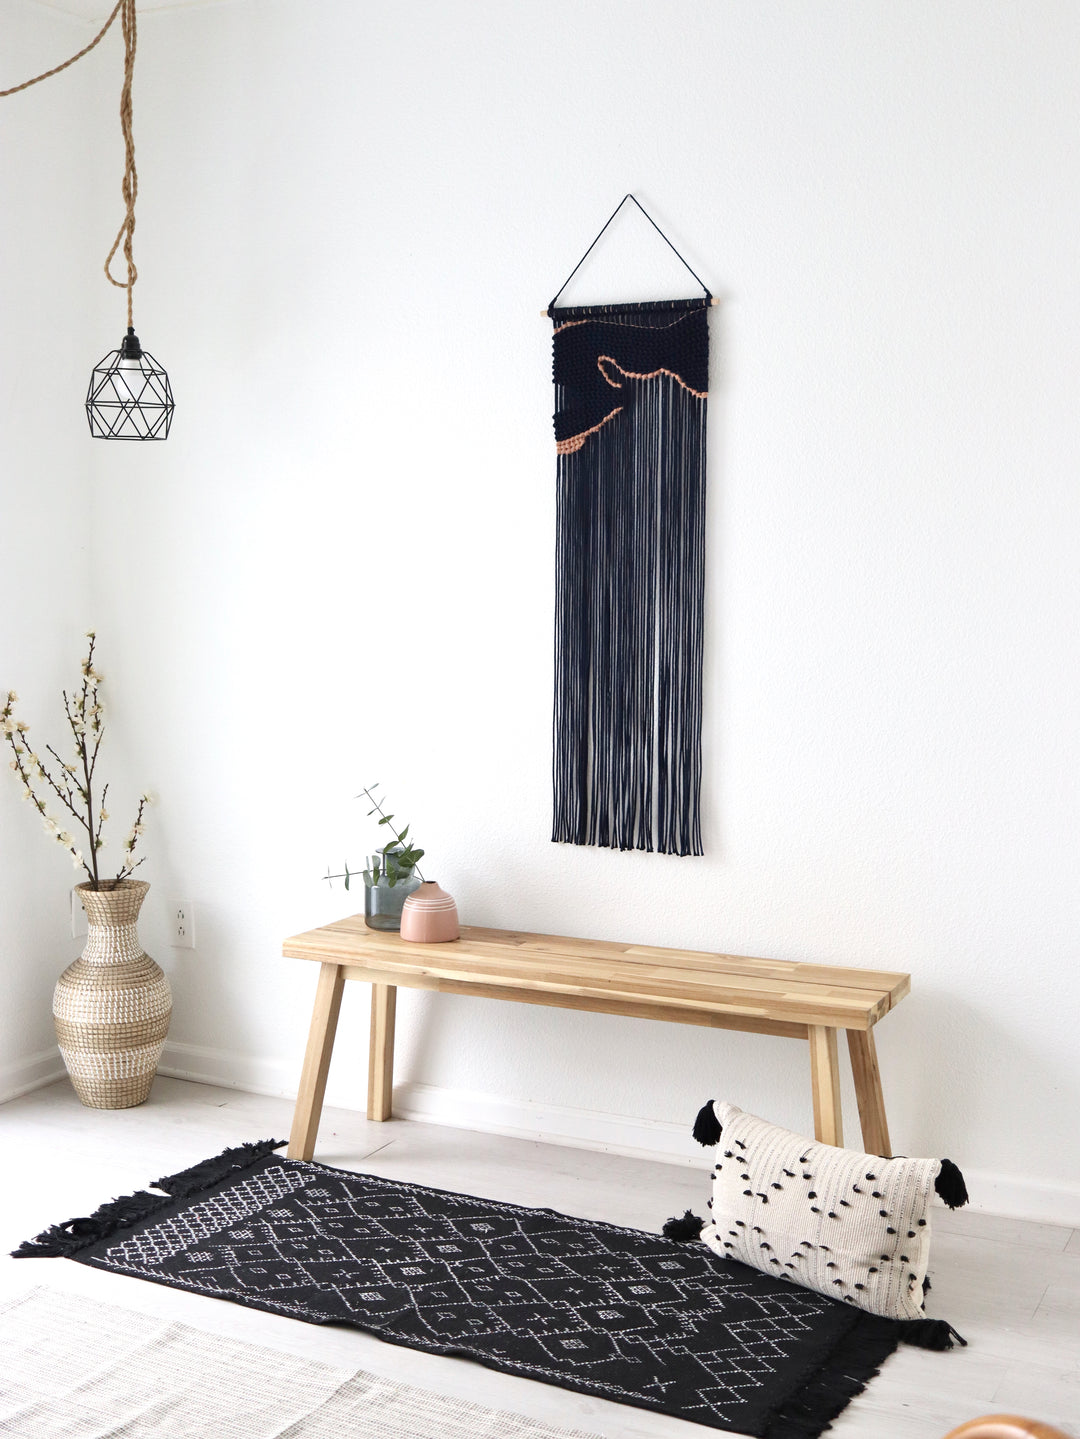 Navy blue macrame wall hanging with an unique design of artwork, creating a stunning visual contrast and contemporary elegance in any wall decor and luxury interior.